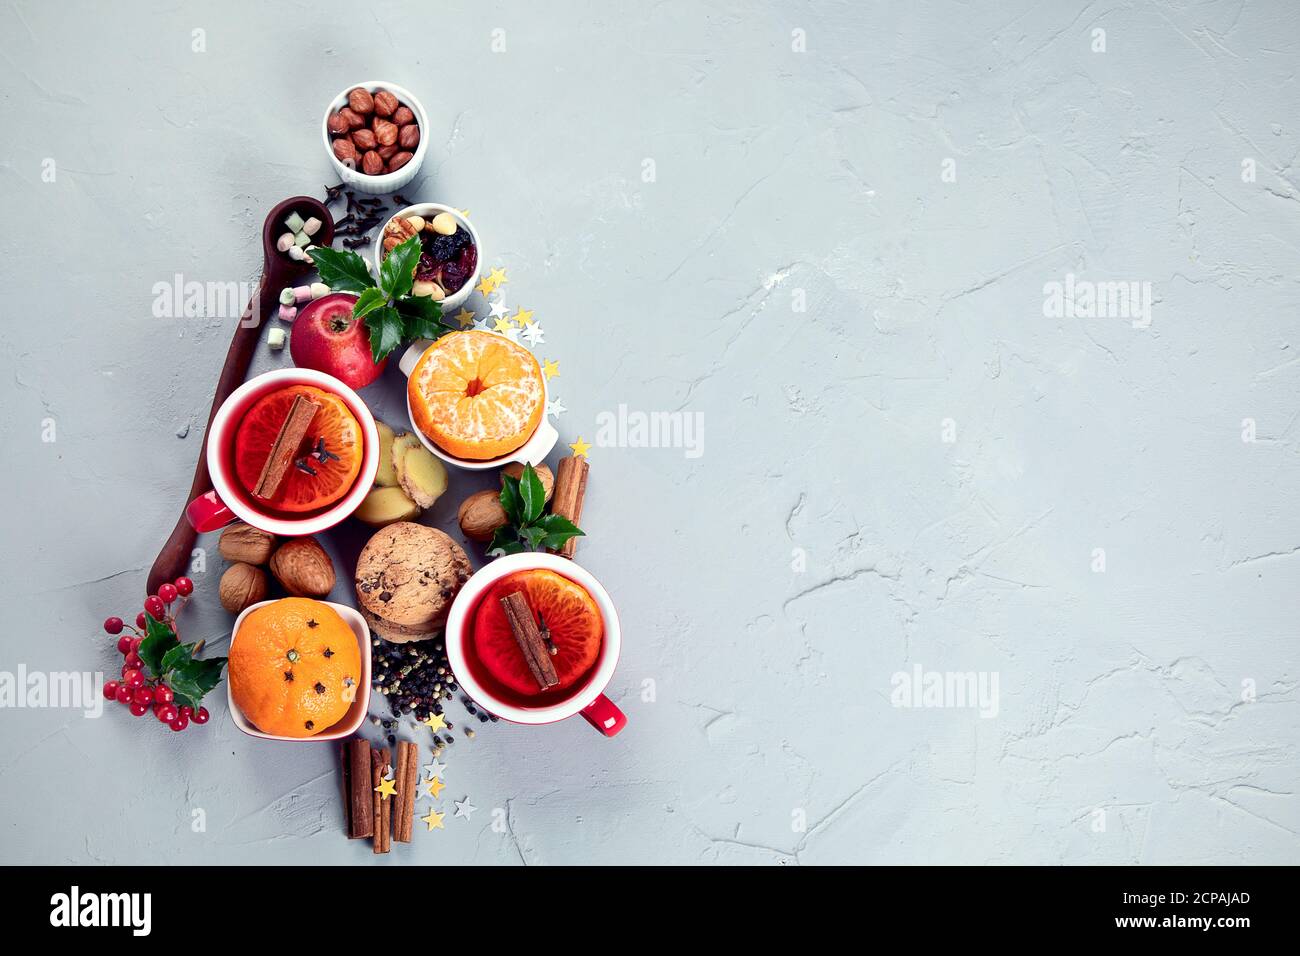 Christmas Tree made of holiday food on concrete background. Top view, flat lay with copy space. Christmas concept. New Year Holidays background. Stock Photo